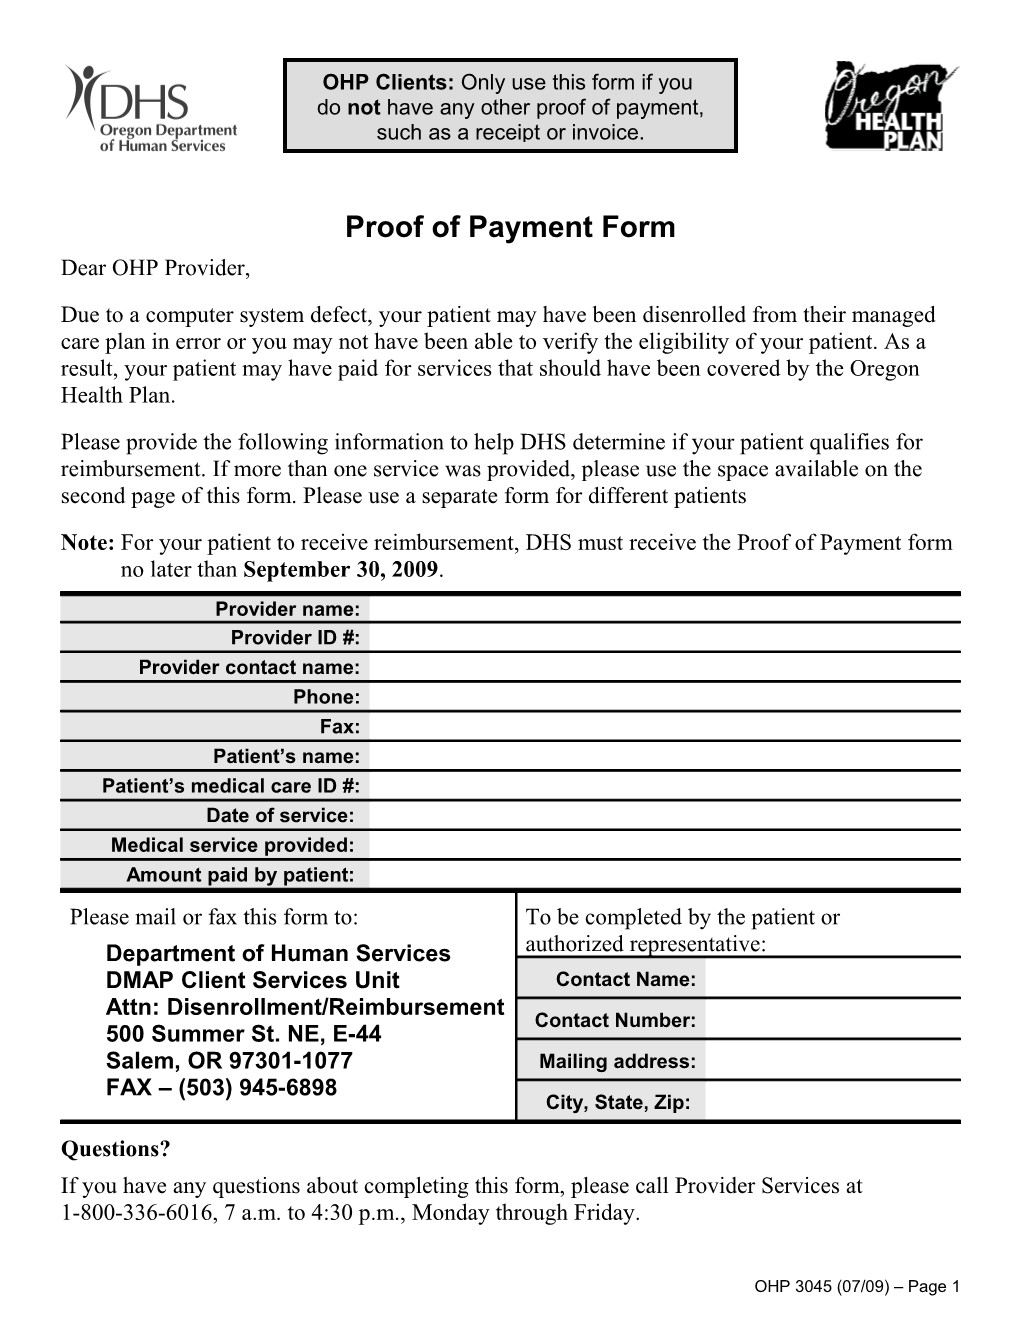 Proof of Payment Form